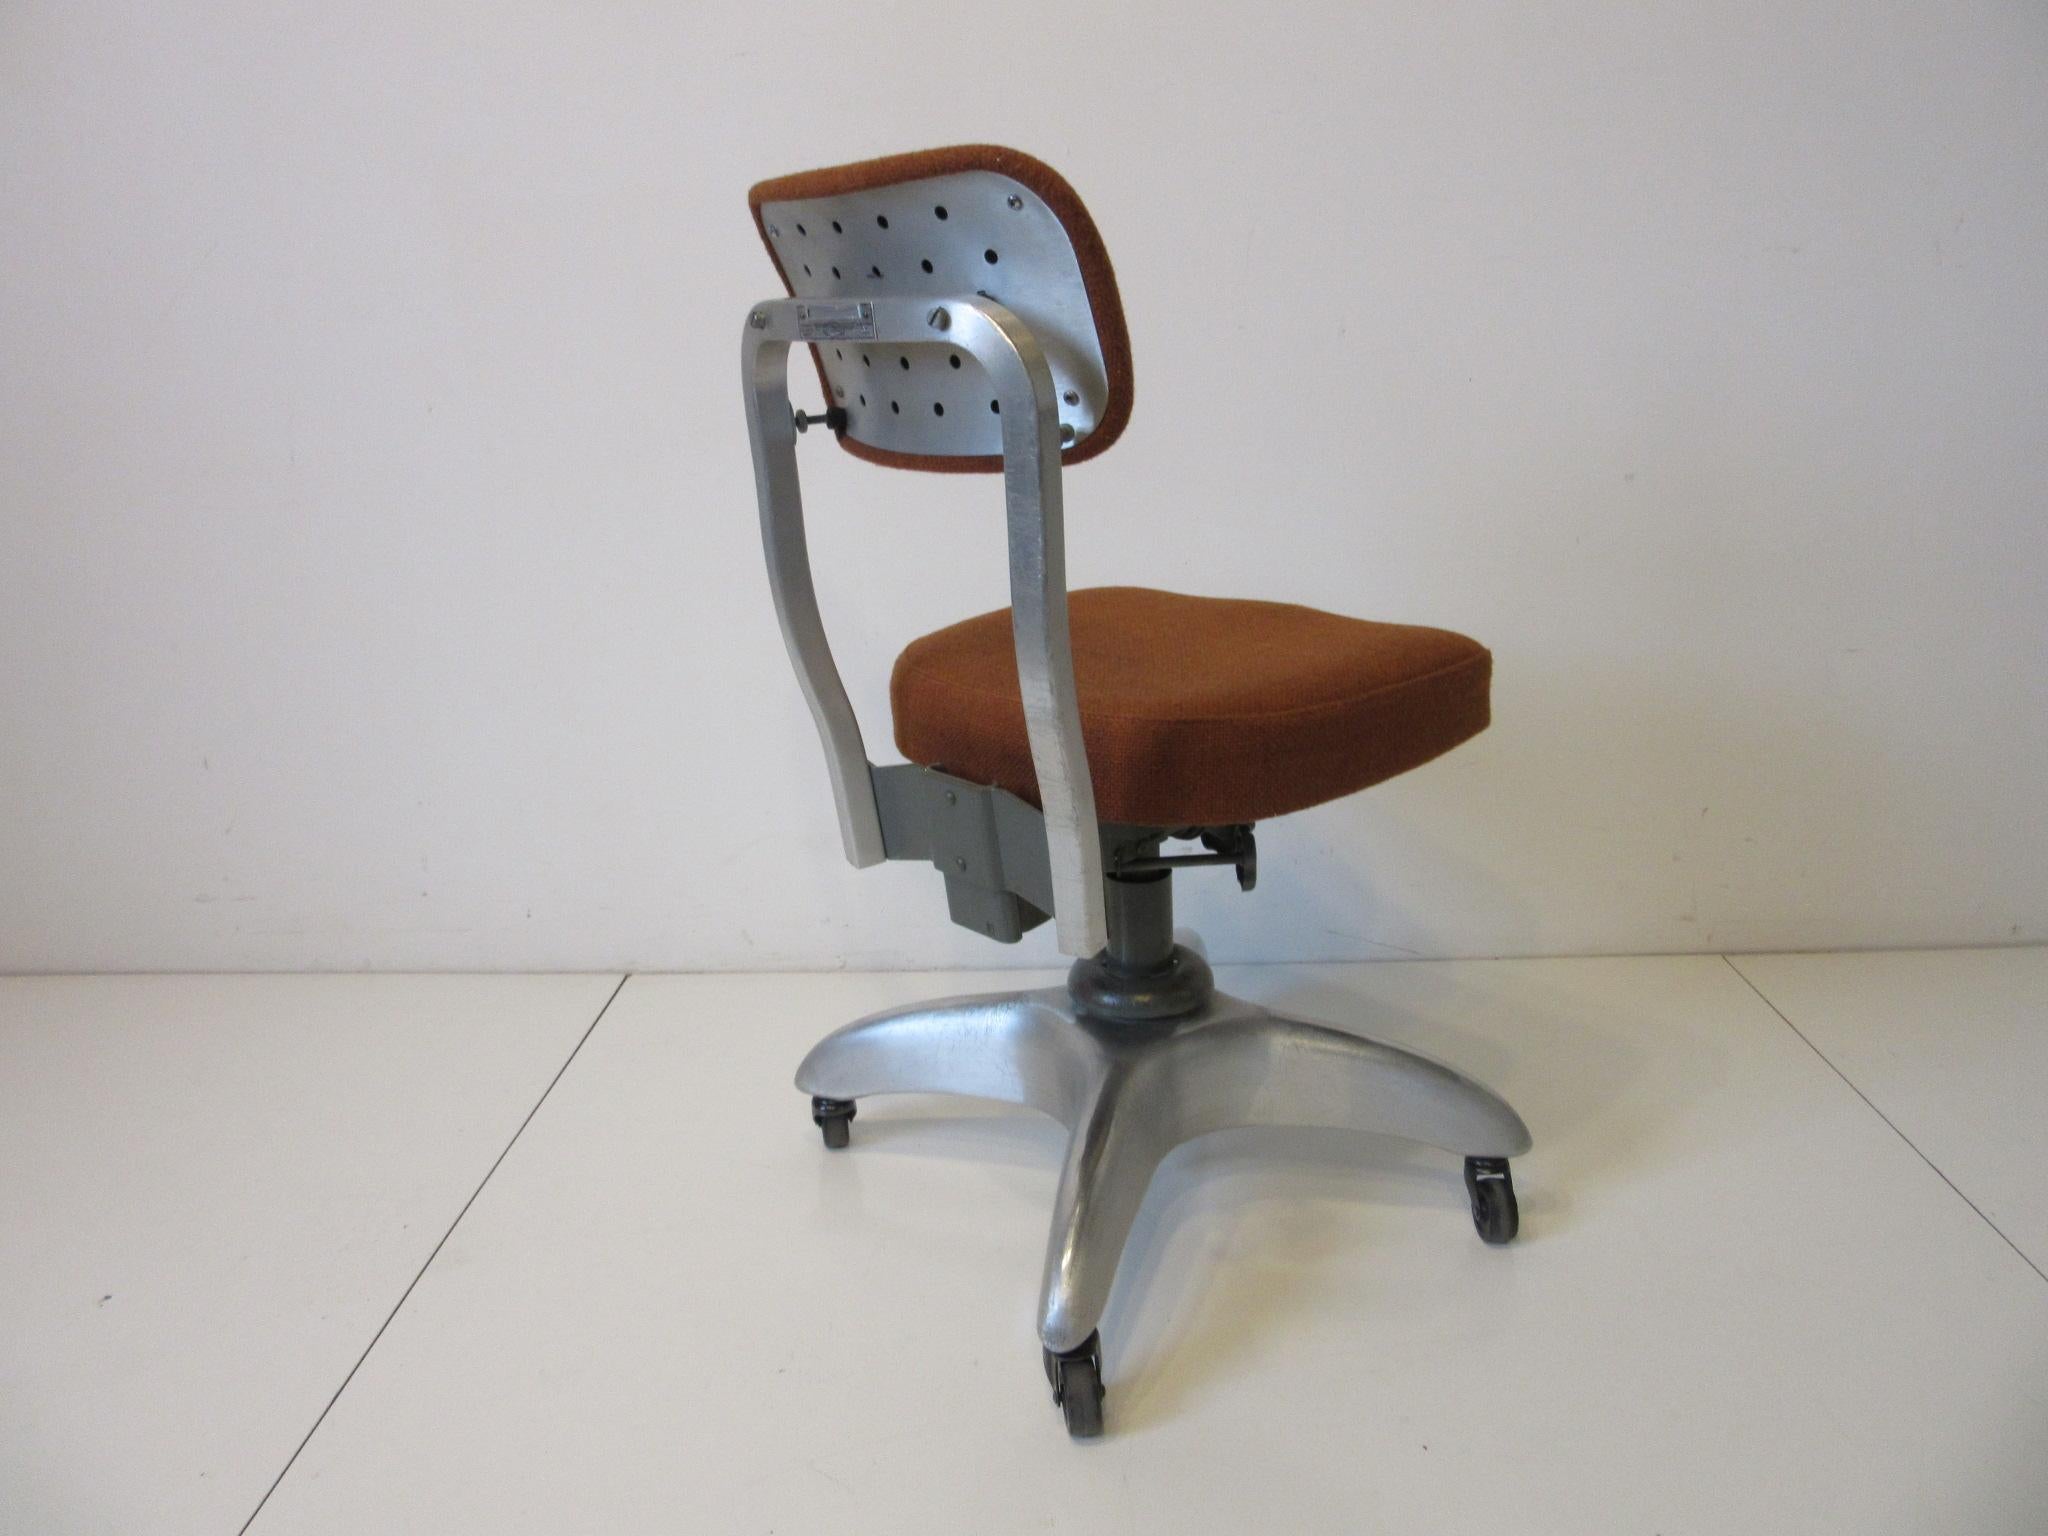 A streamline / industrial rolling, swiveling and adjustable desk chair with wonderful backrest design that also tilts for comfort. Cast aluminum star base and frame makes this chair light but very strong and long lasting upholstered in contract